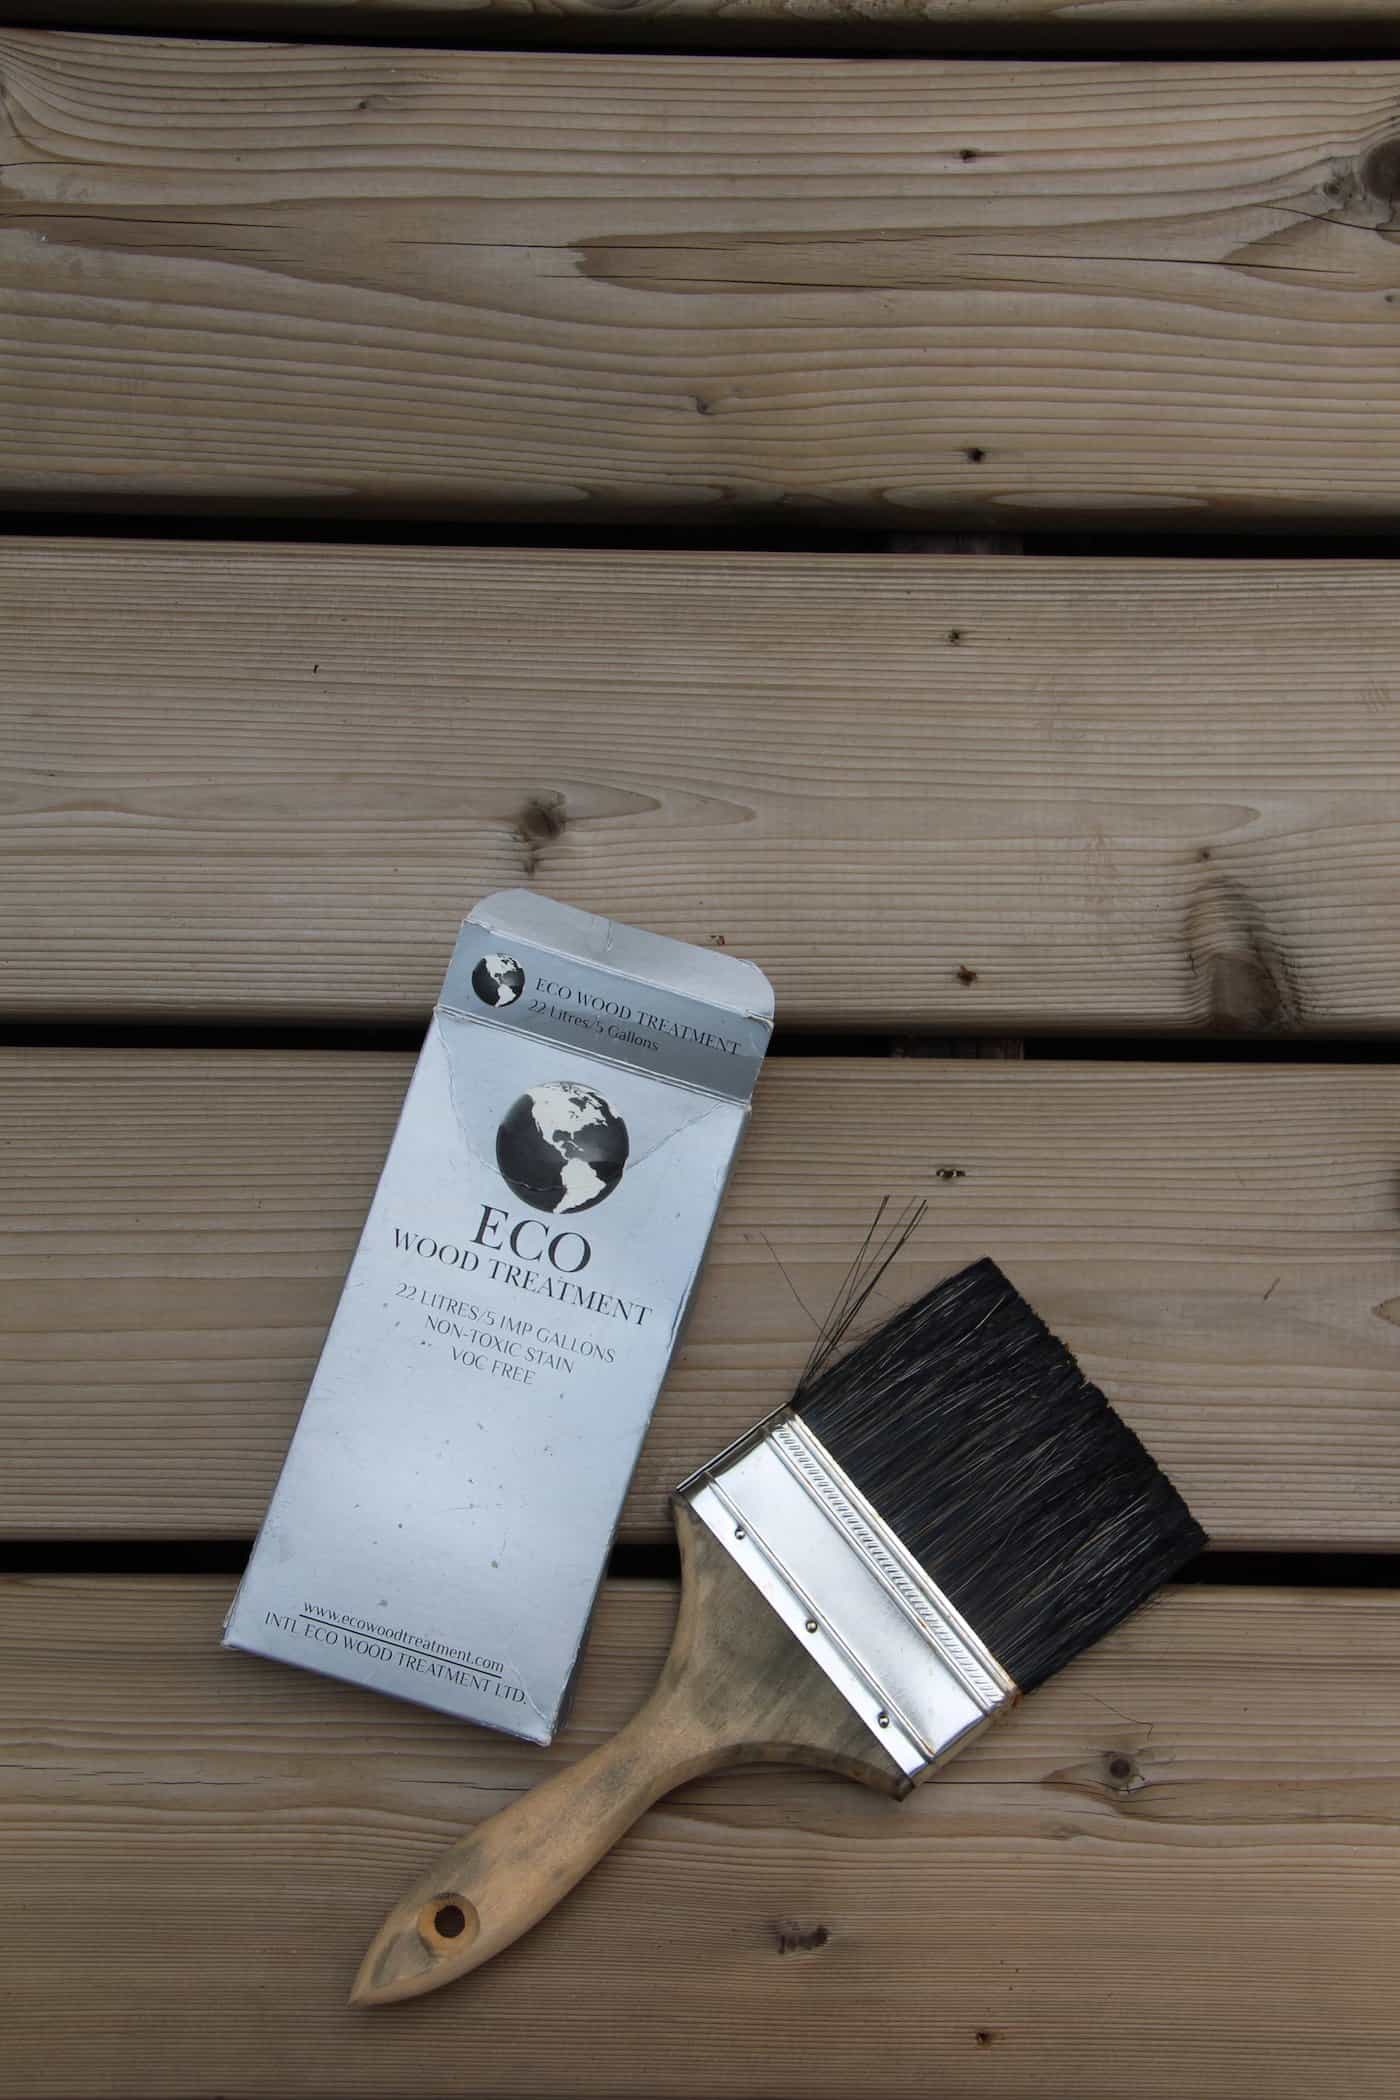 Eco wood treatment - eco-friendly garden furniture and deck stain #ecowoodtreatment #ecostain #ecofriendly #woodtreatment